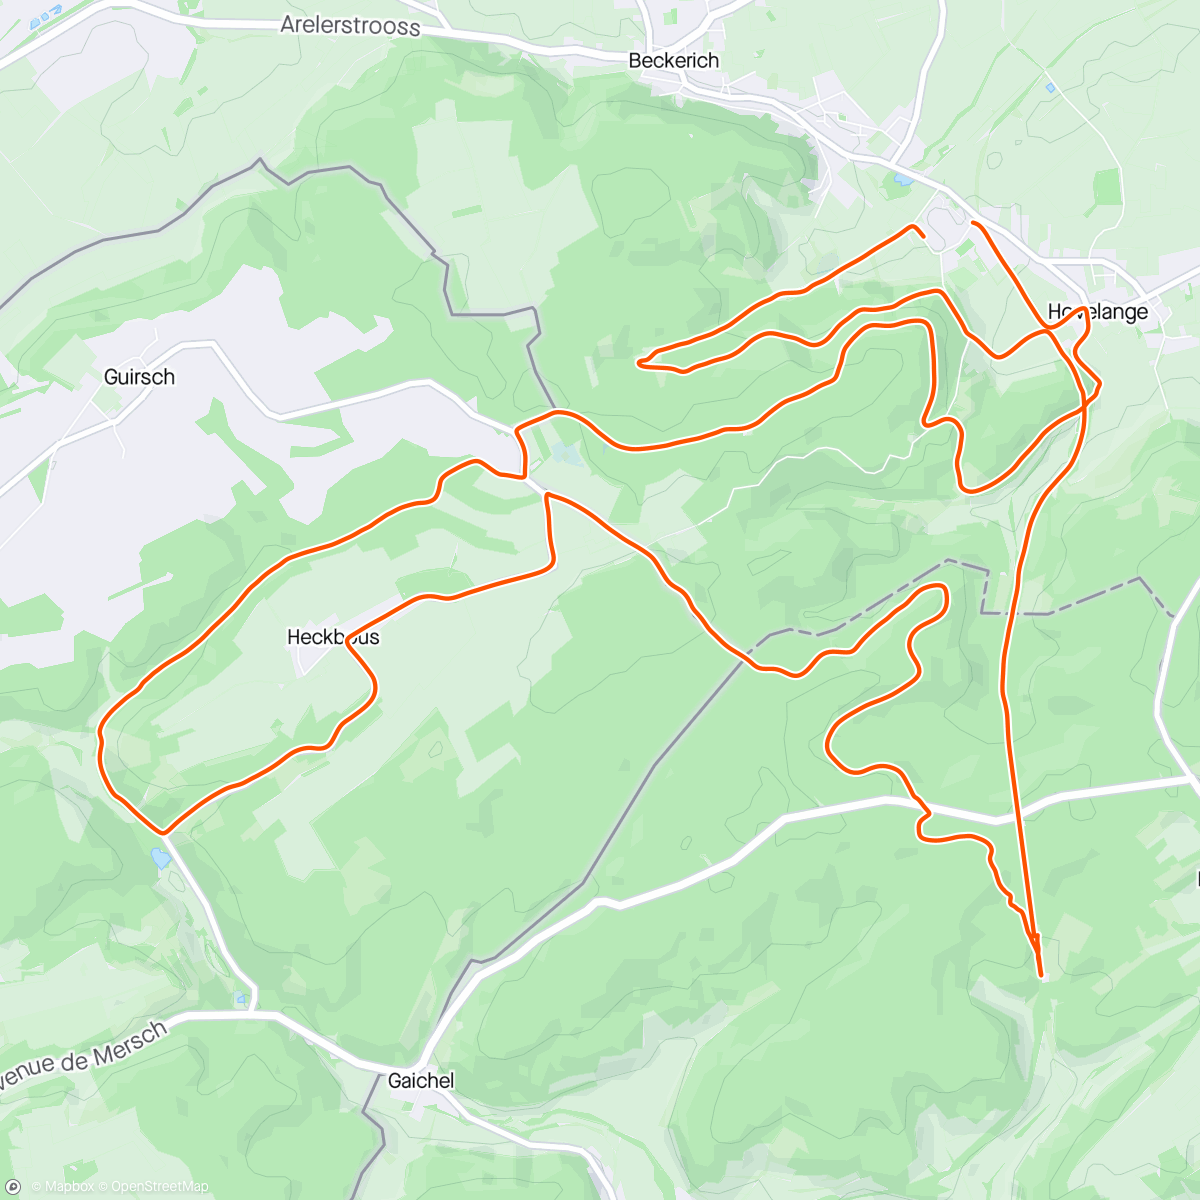 Mapa de la actividad, Beckerich2024 half-marathon semi-marathon of the two Luxembourg with Augustin. Aim low zone 4. Achieved. First attempt at ½ for Augustin who finishes 10mn earlier than me !!!!!! Congrats 🥰🎉🥳🎊🪅🪩